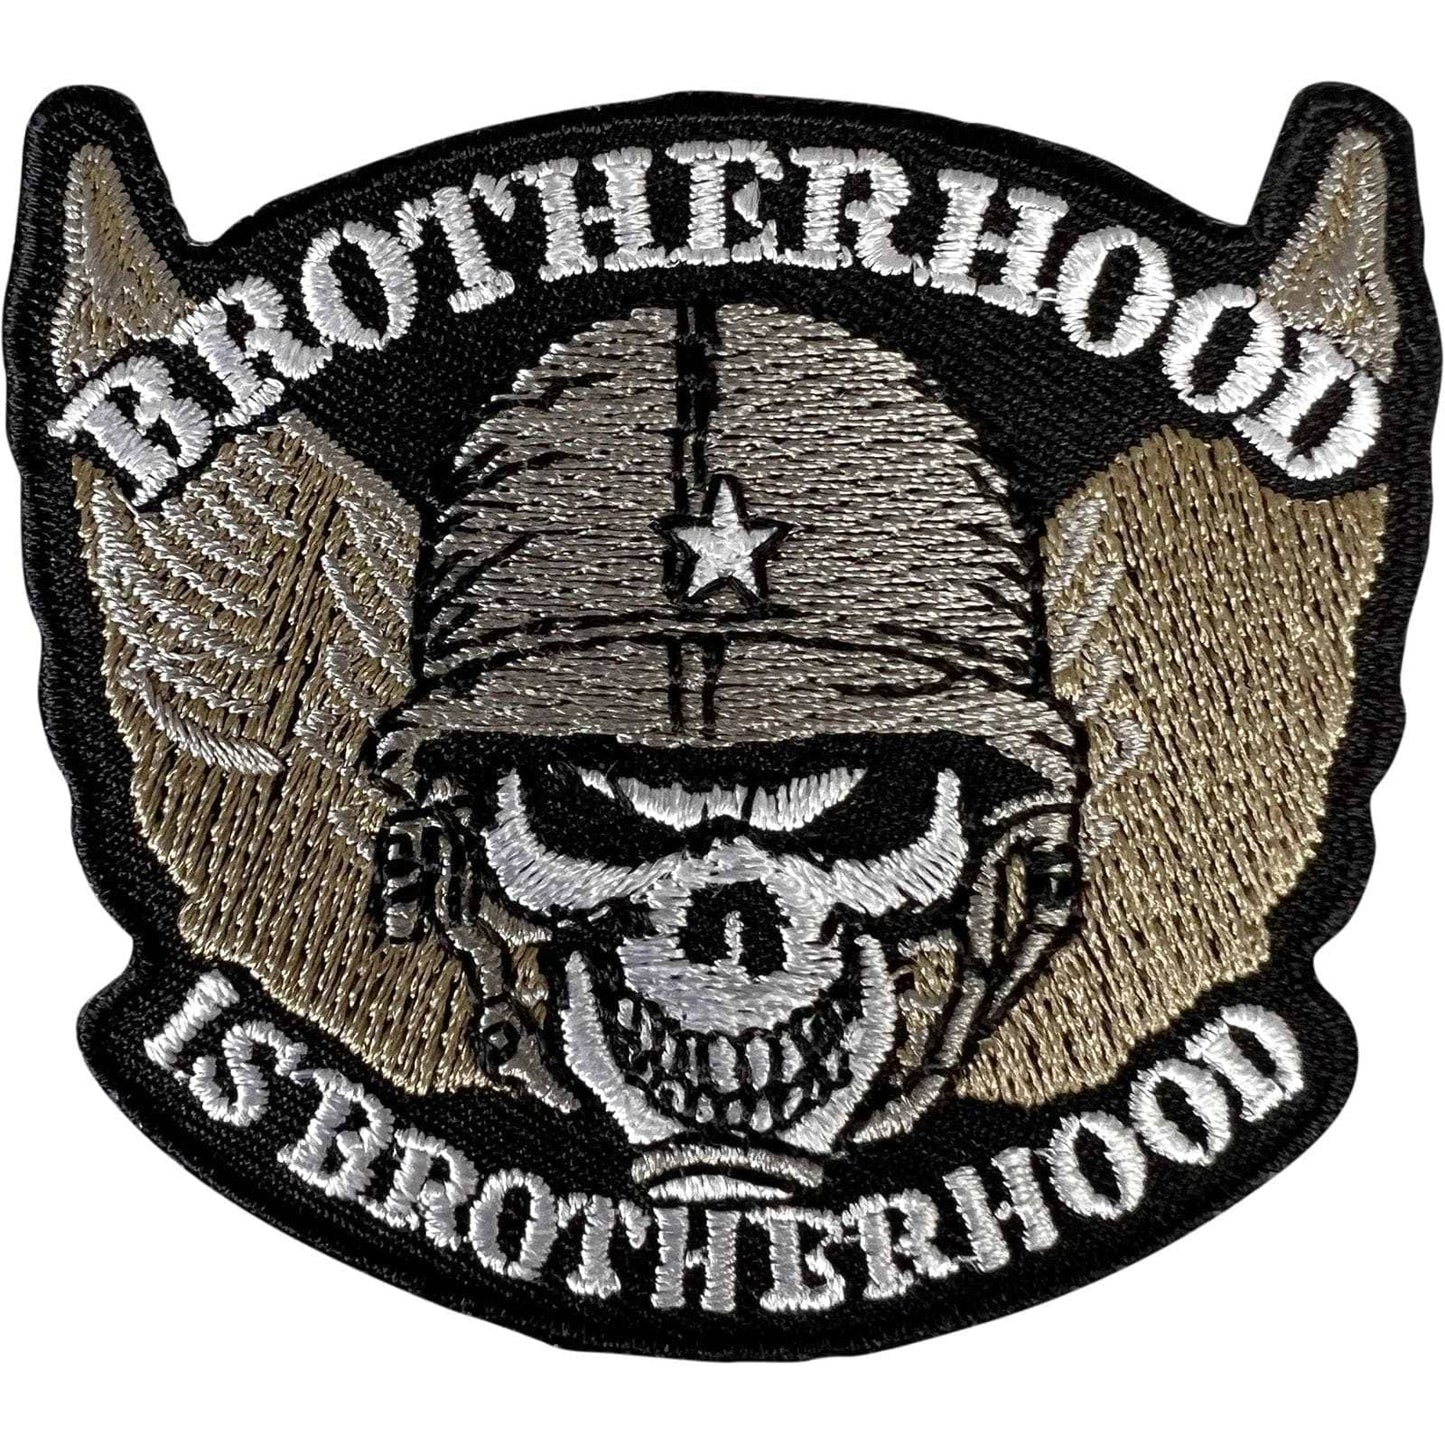 Army Skull Patch Iron Sew On Clothes Bag Motorbike Motorcycle Embroidered Badge